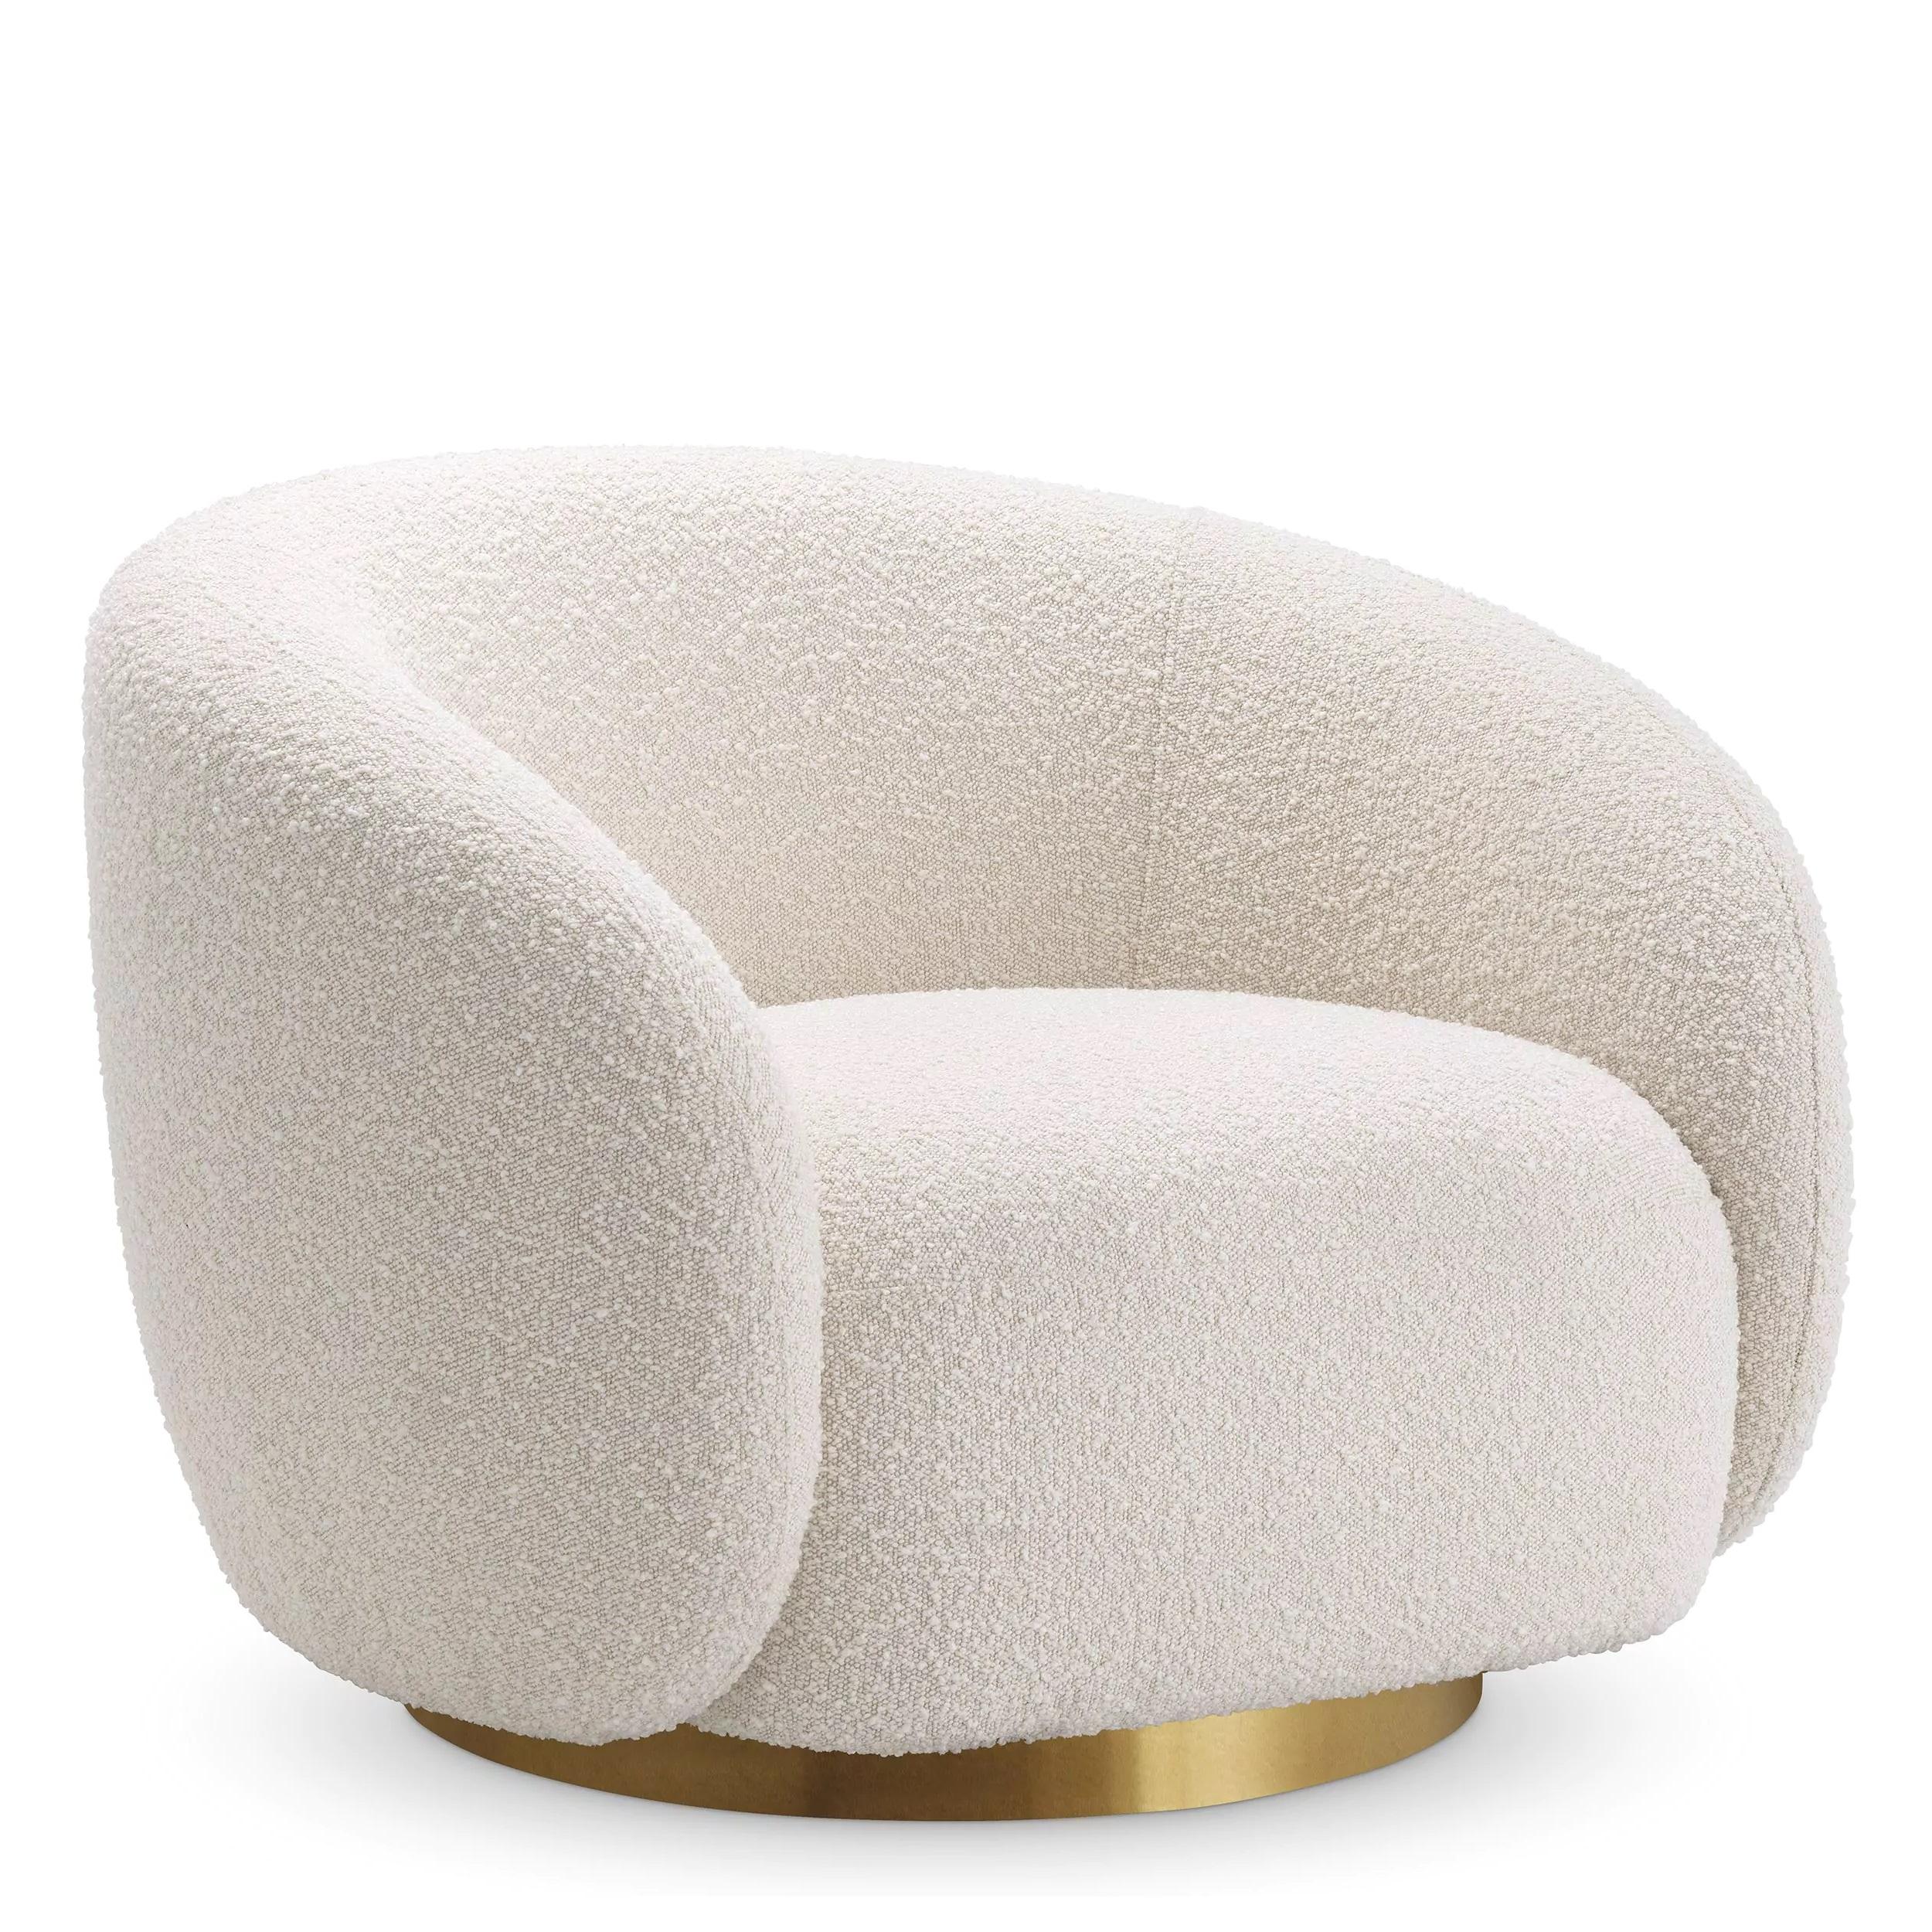 Welcoming and curved swivel armchair in beige bouclé fabric with brass finishes base.